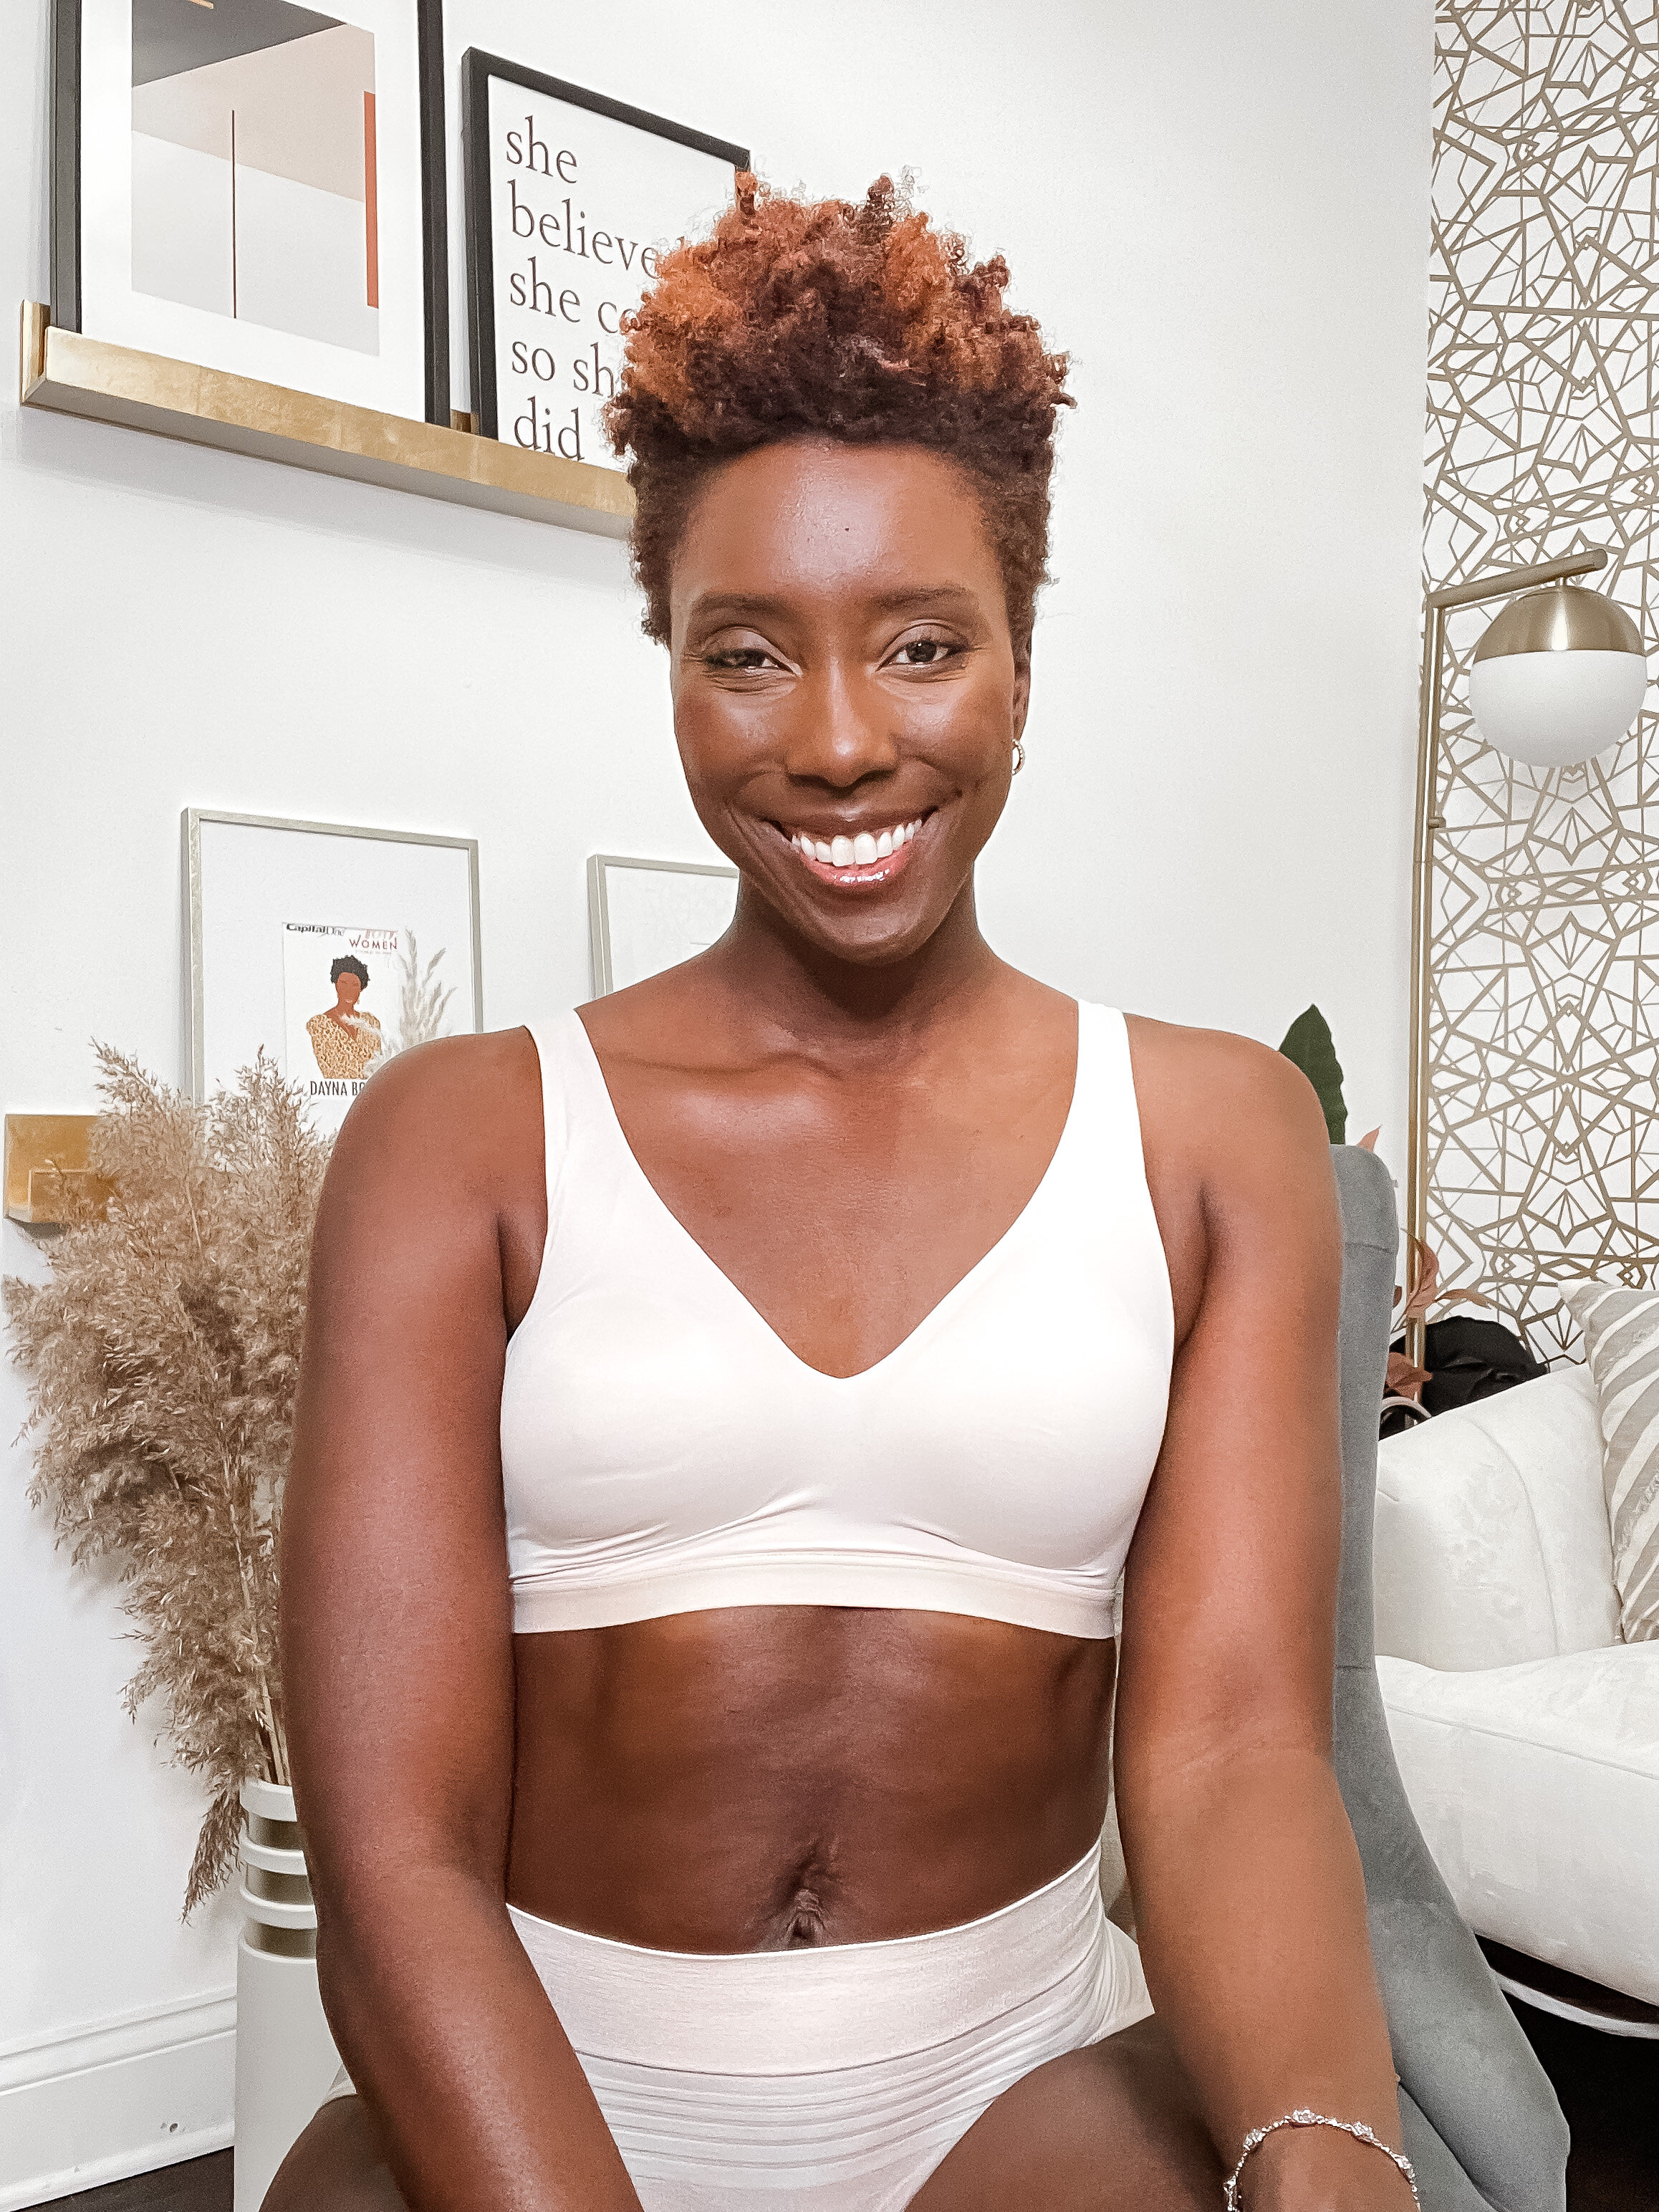 The perfect, comfortable bras we all need from Warner Bras! — DAYNA BOLDEN